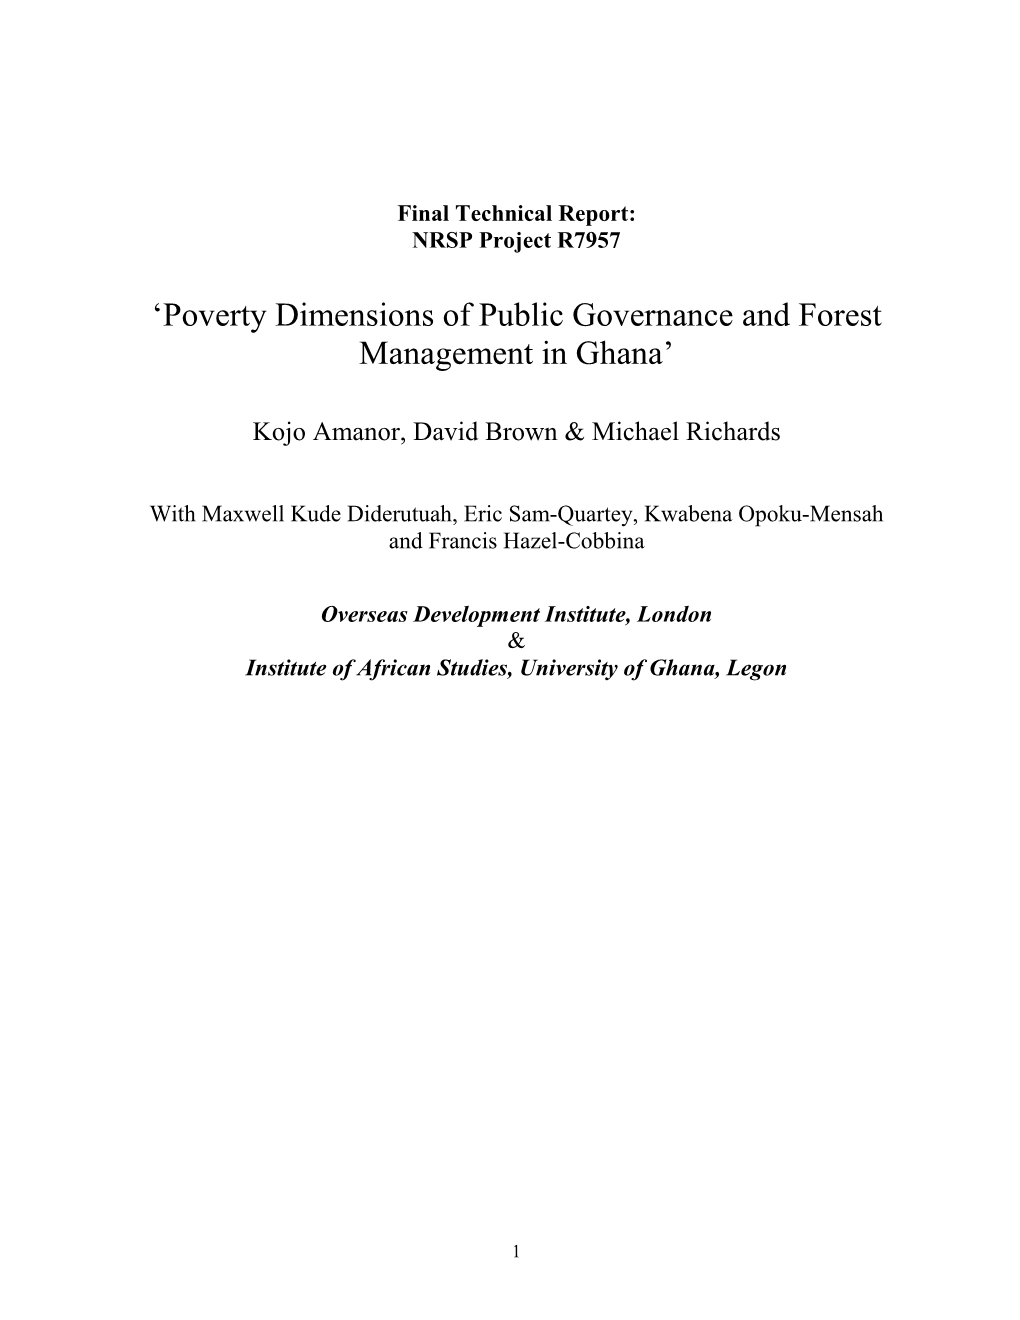 Poverty Dimensions of Public Governance and Forest Management in Ghana’